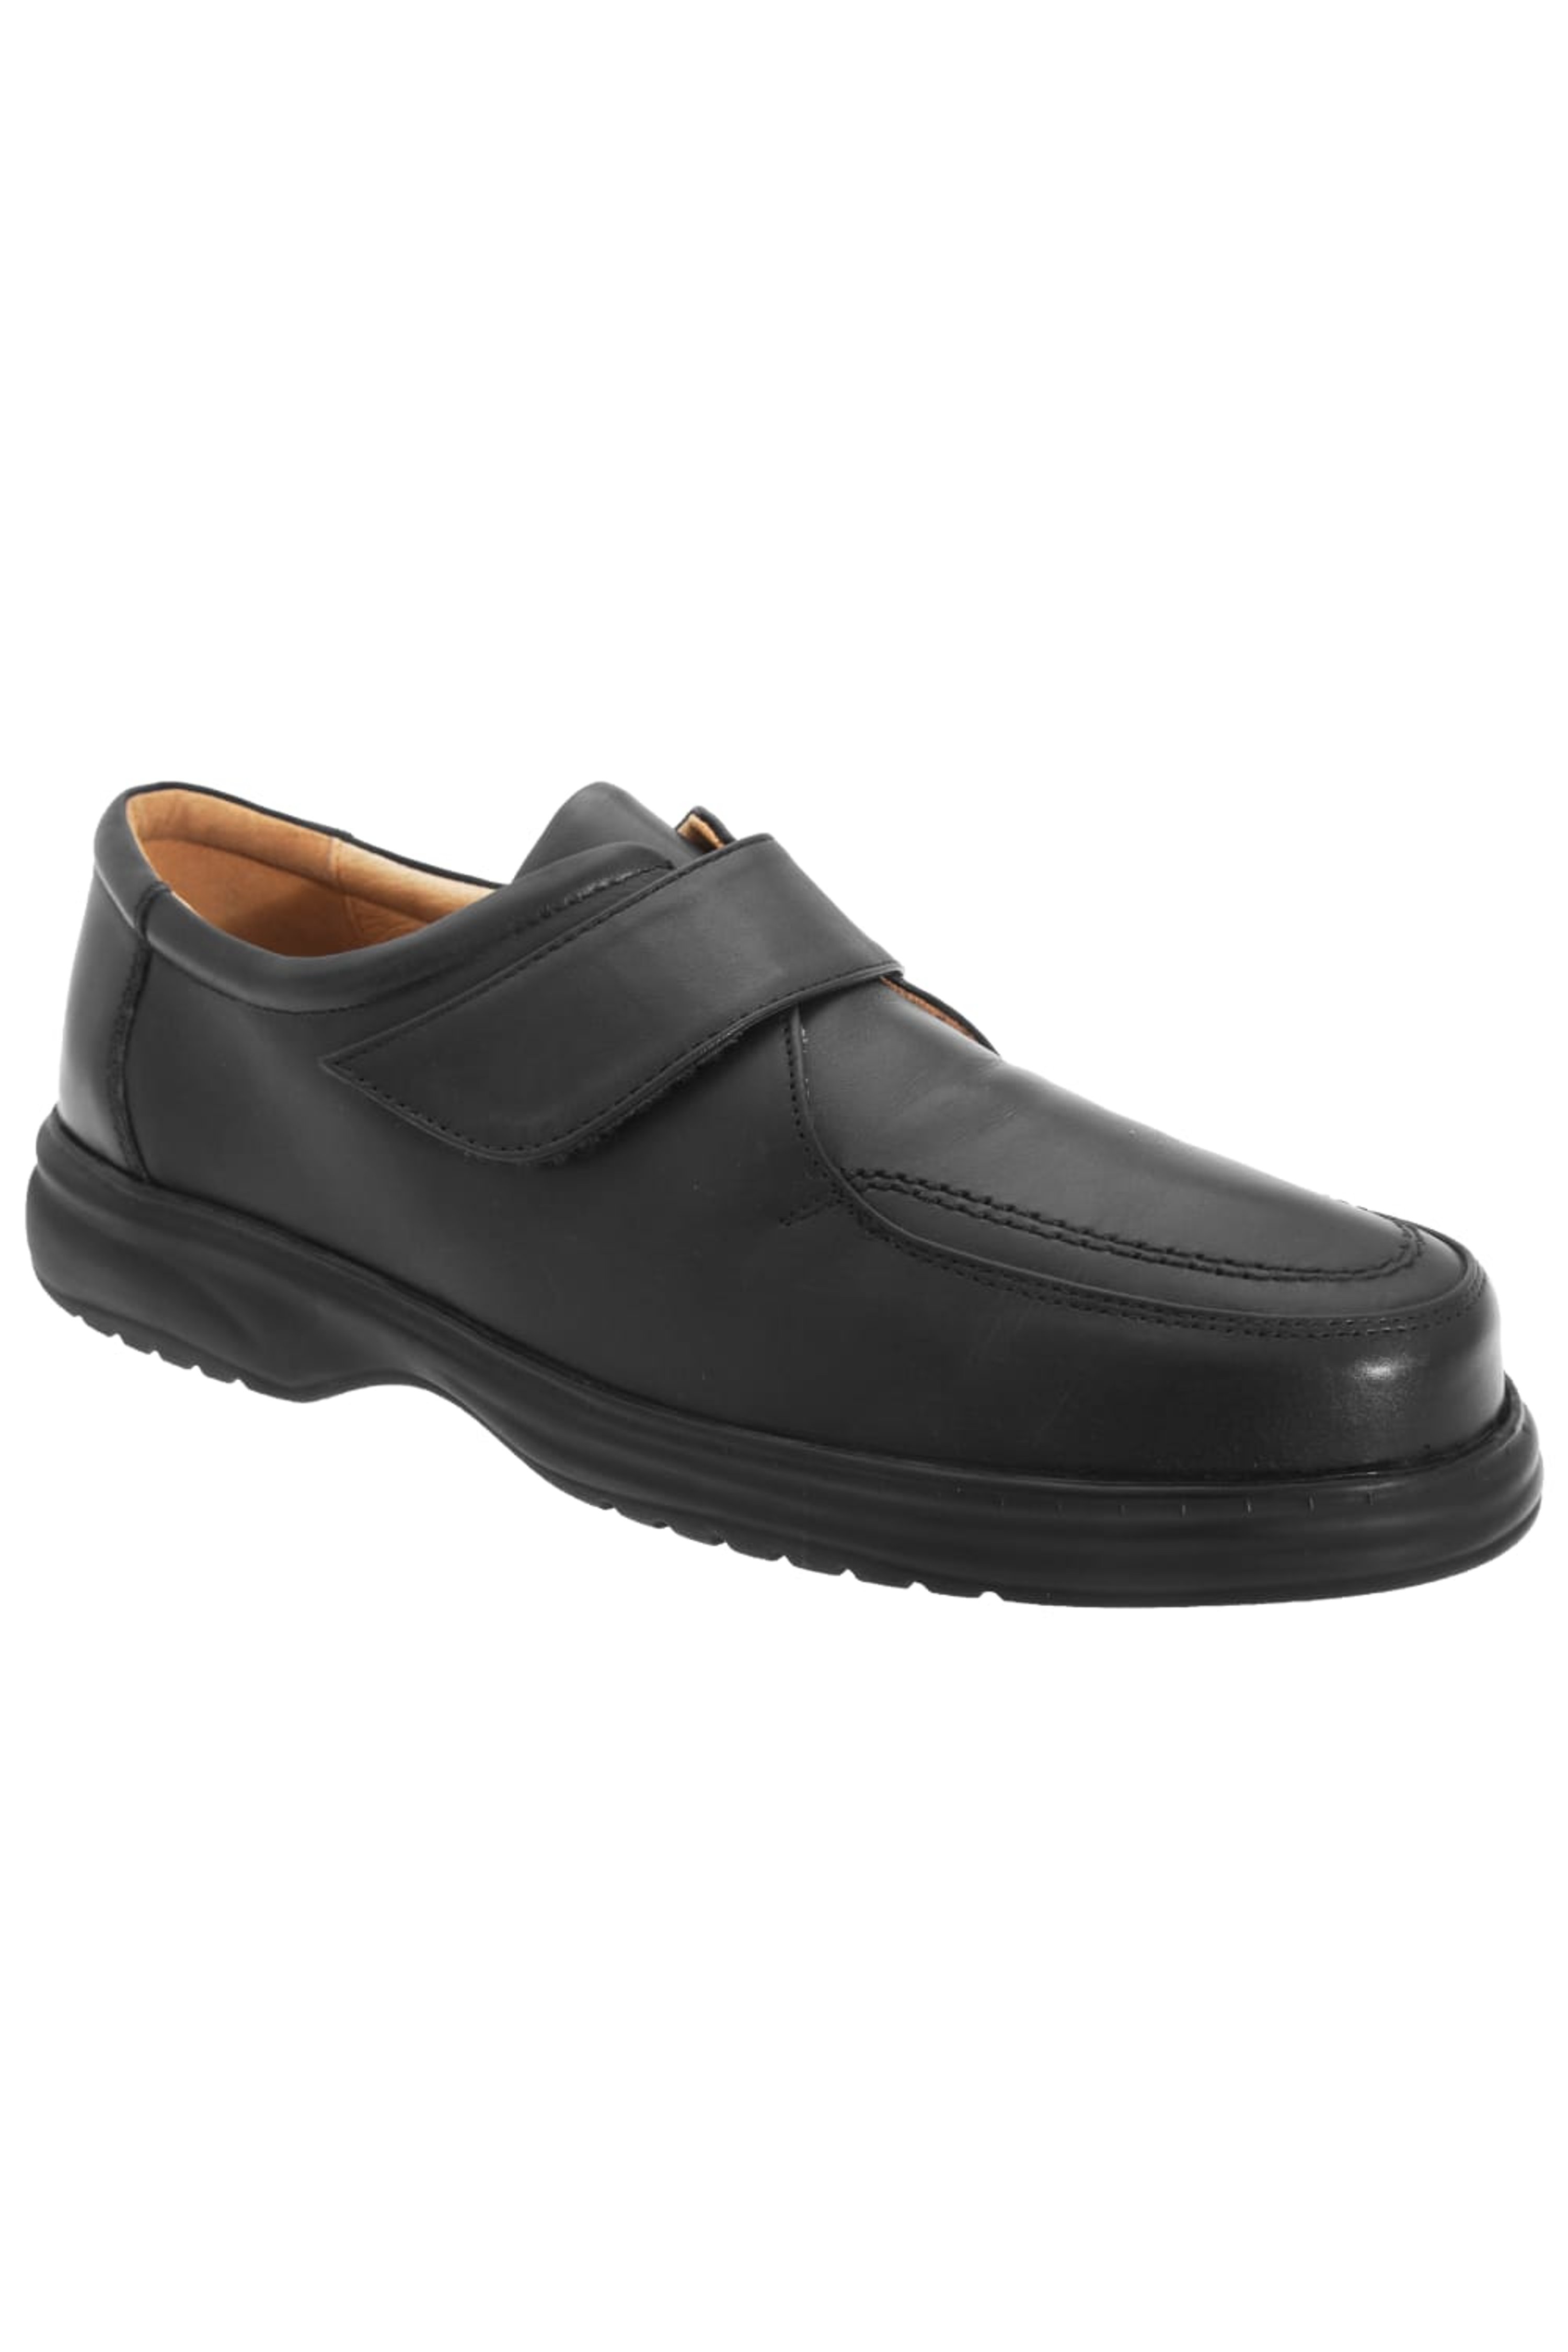 ROAMERS ROAMERS MENS SUPERLITE WIDE FIT TOUCH FASTENING LEATHER SHOES (BLACK)